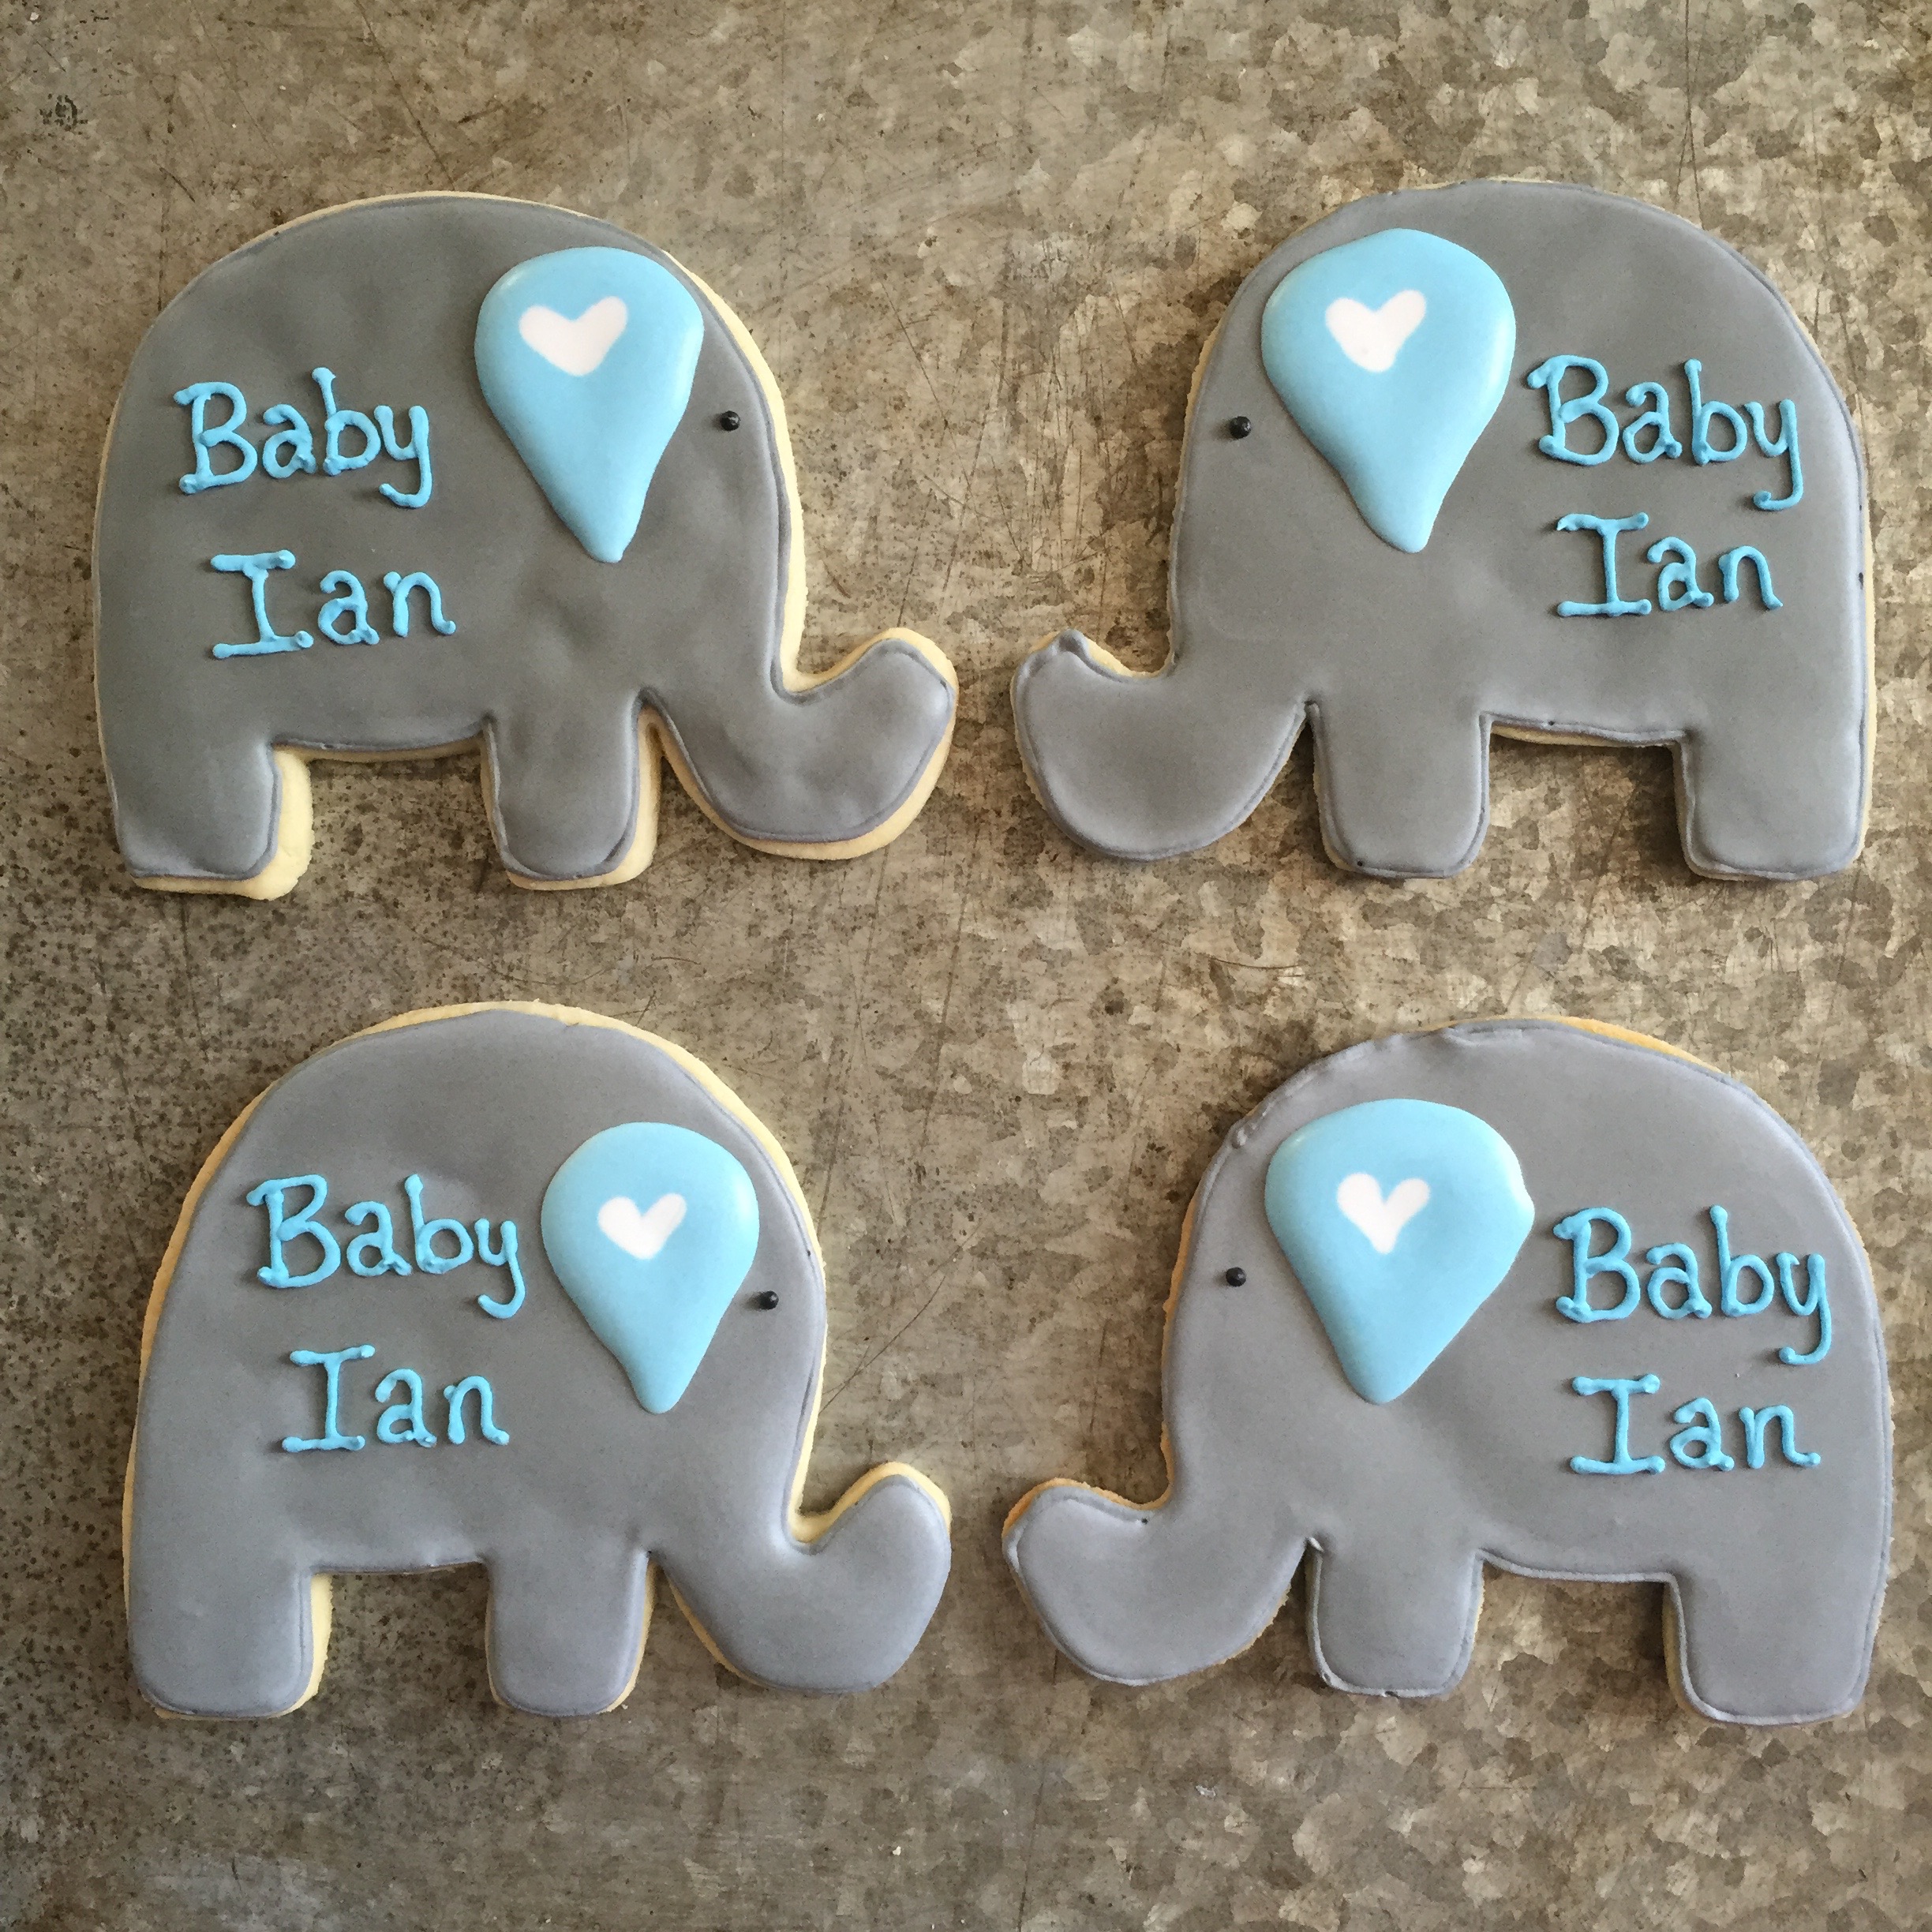 Dallas Fort Worth Bakery decorated cookies and dessert bars for weddings baby showers bridal showers and events